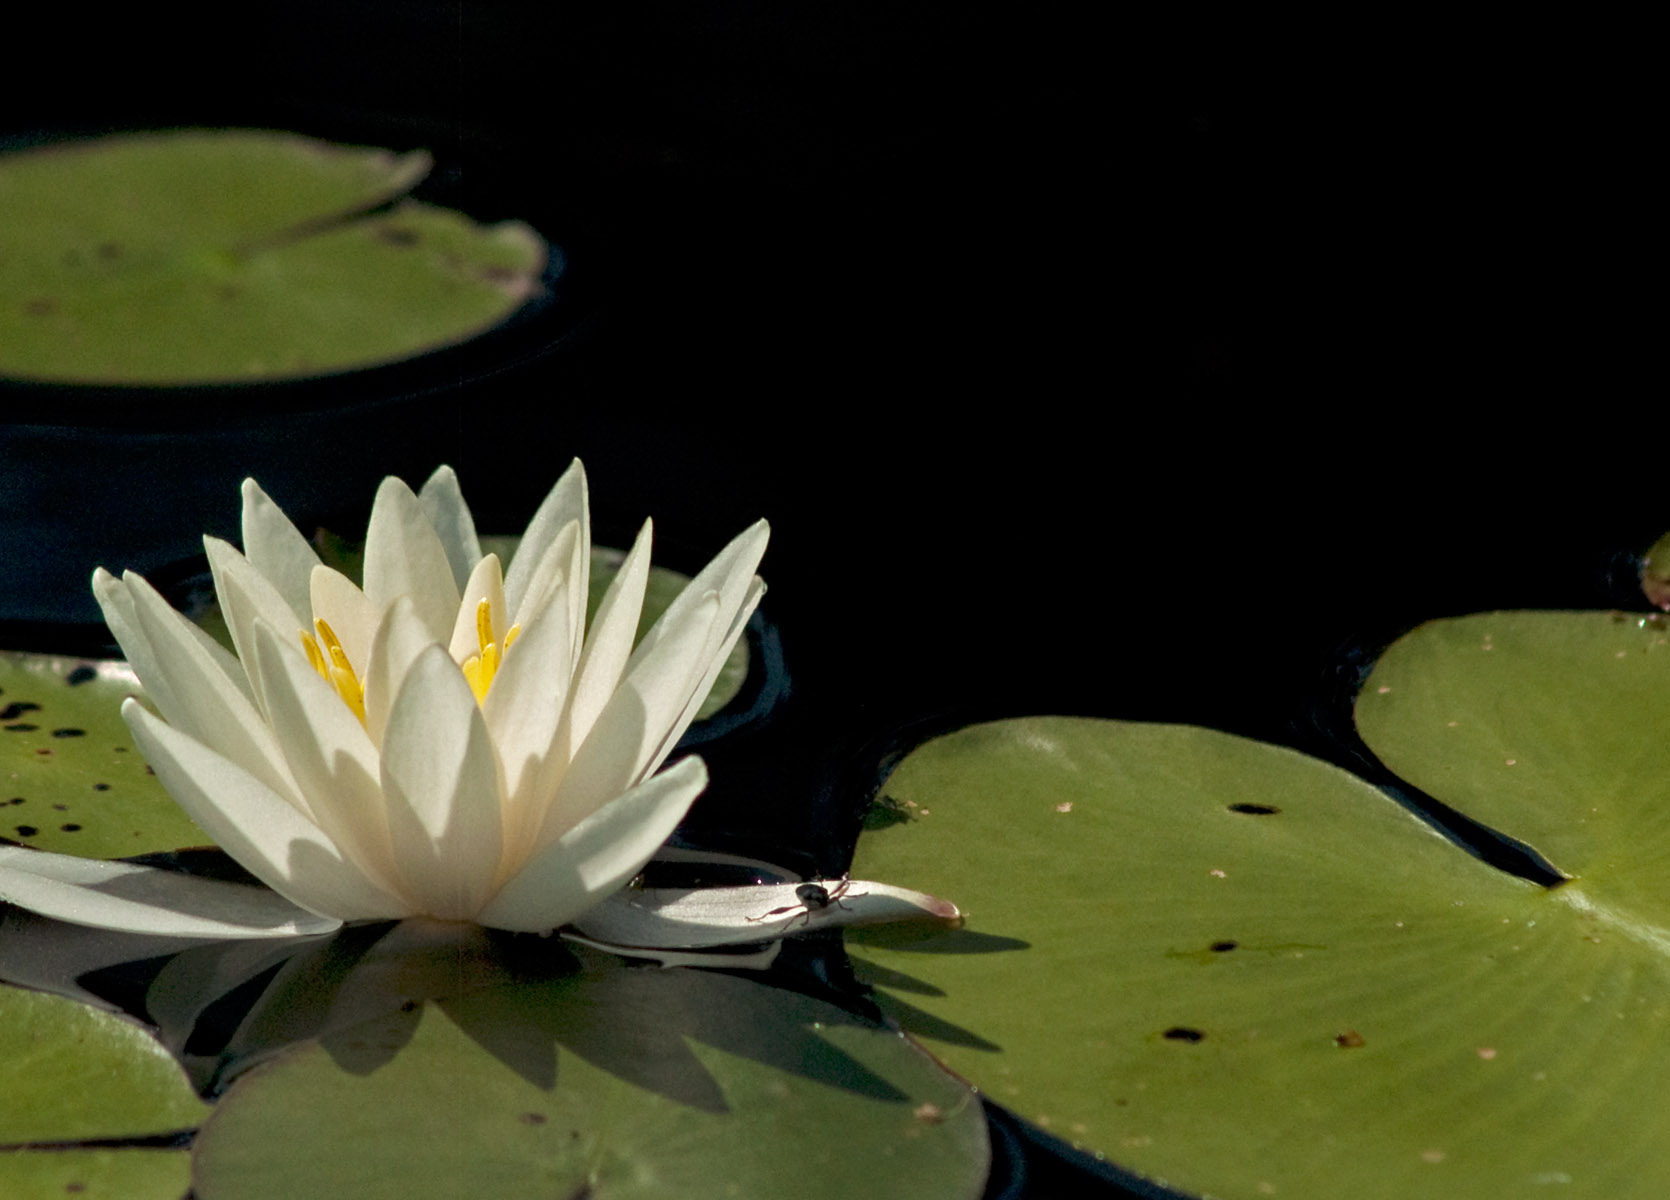 Labrador Lake has a healthy population of white water lilies too, (Nymphaea odorata)